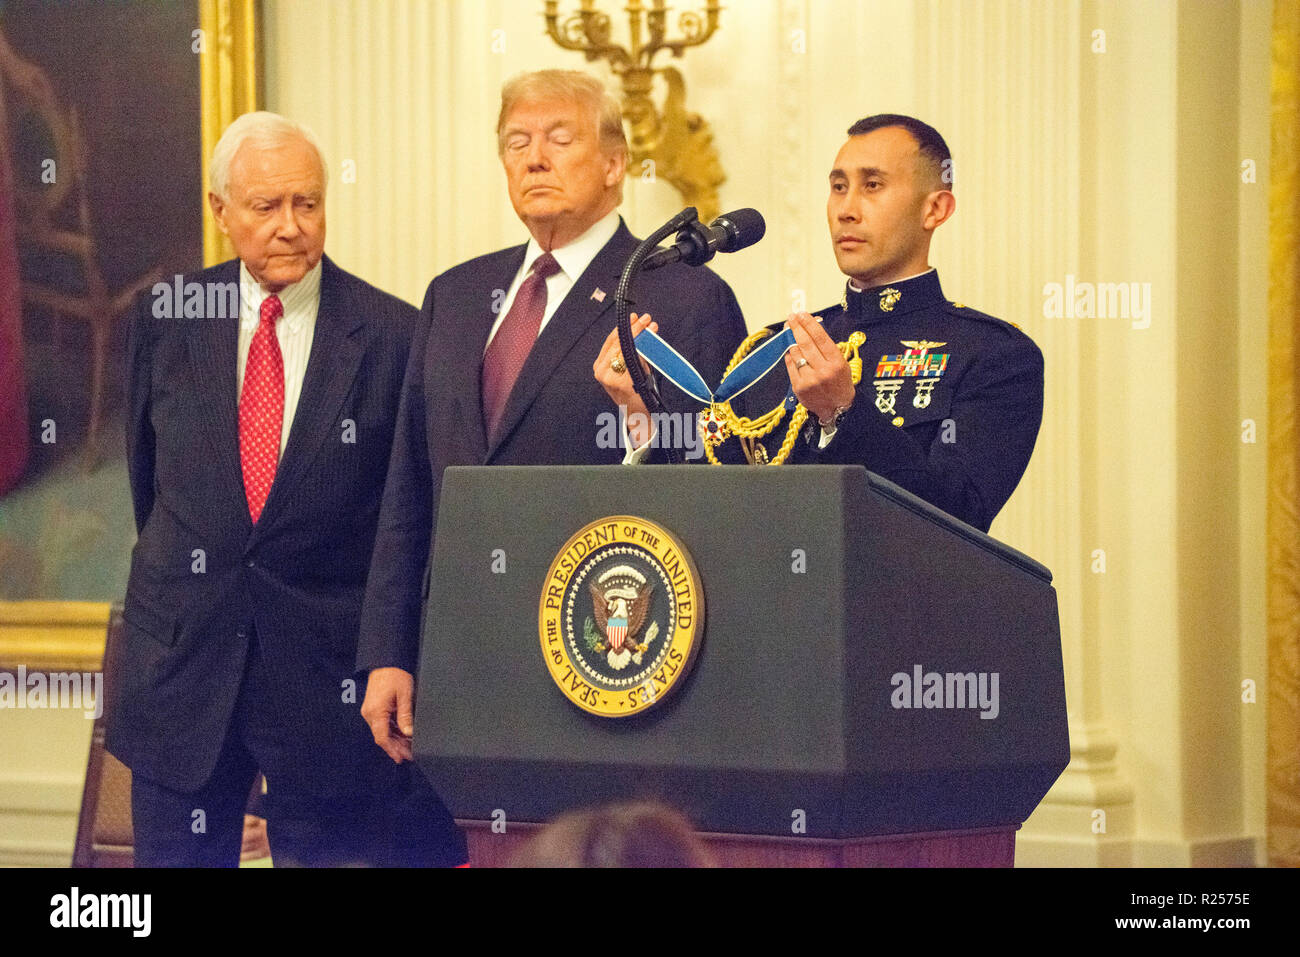 Washington, DC November 16 ,2018: President Donald J Trump presents the Medal of Freedom, the highest civilian award presented by the White House in a ceremony in the East Room of the White House  to Sen Orrin Hatch. Patsy Lynch/Alamy Stock Photo